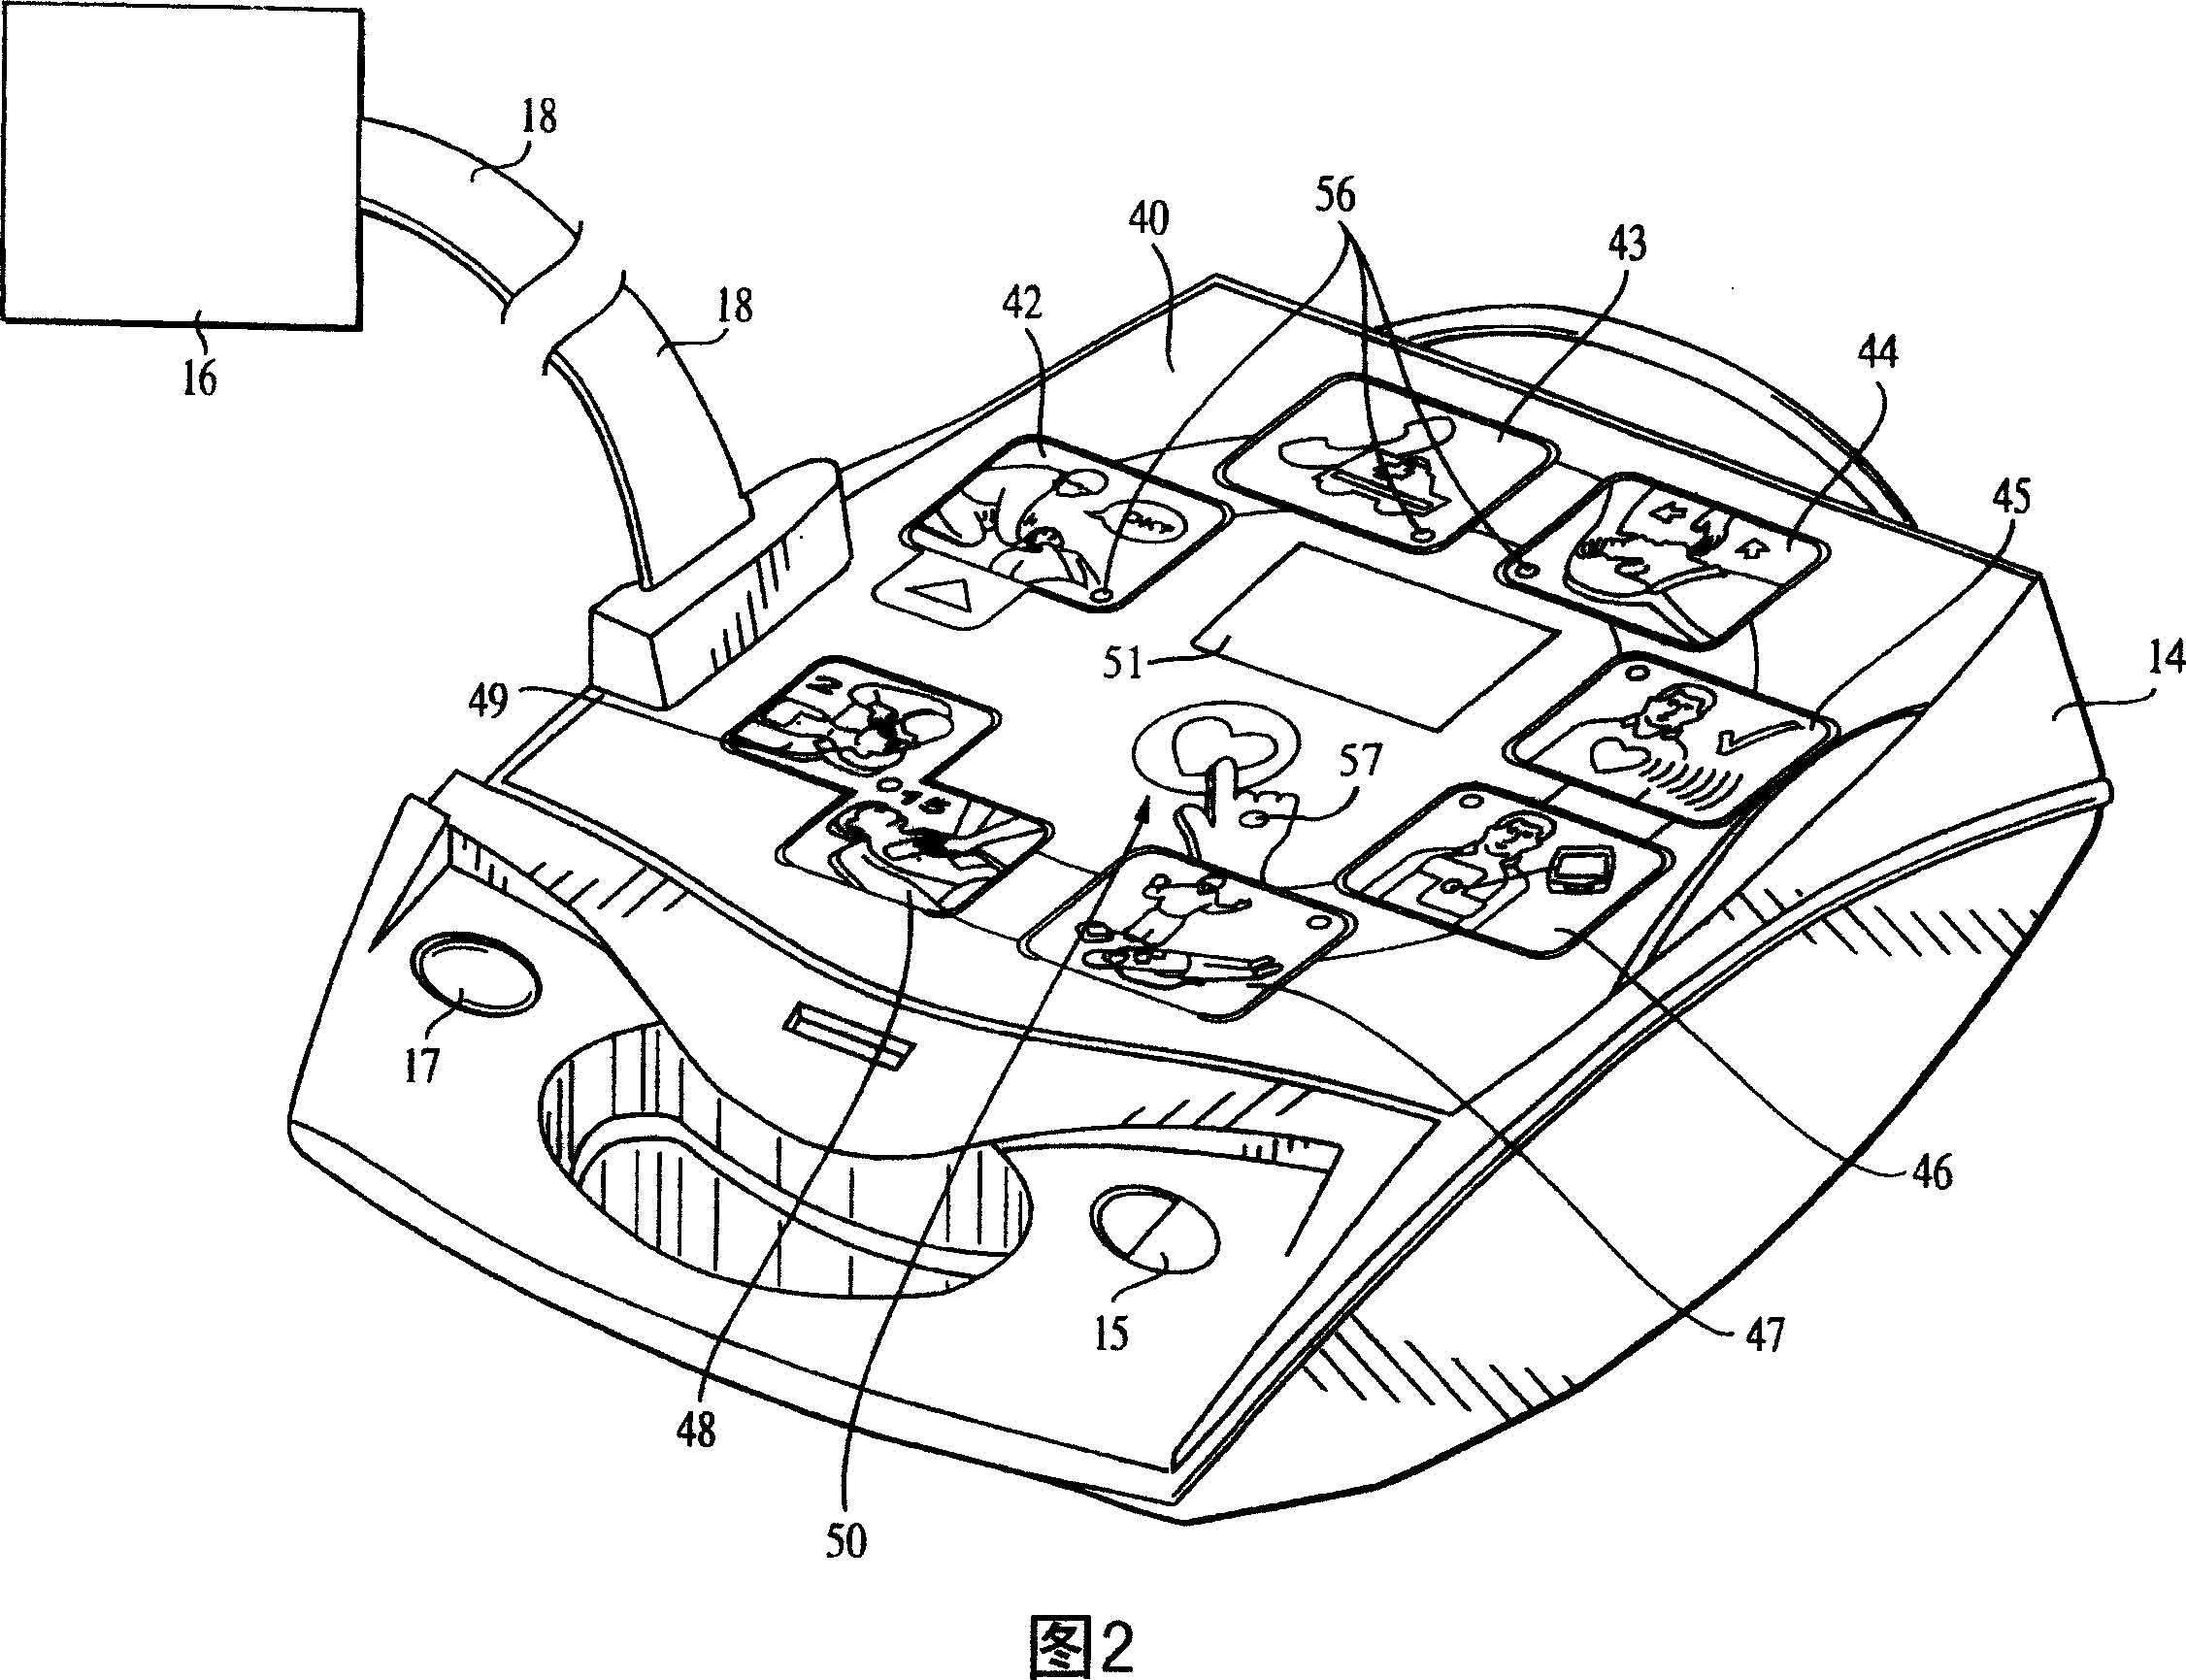 Automated resuscitation device sensing and promoting artificial respiration